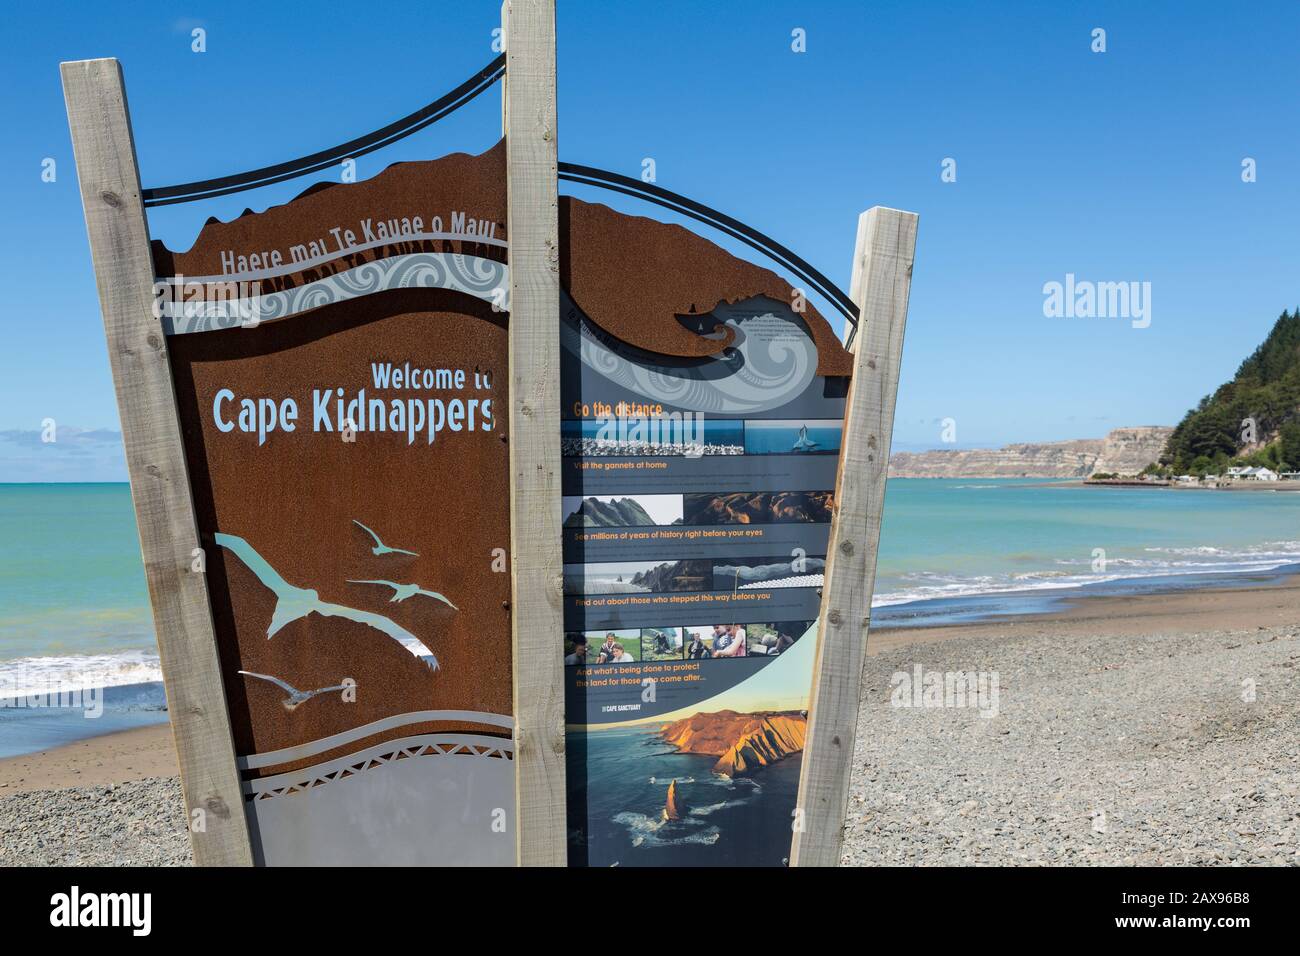 Cape Kidnappers welcome sign, North Island, New Zealand Stock Photo